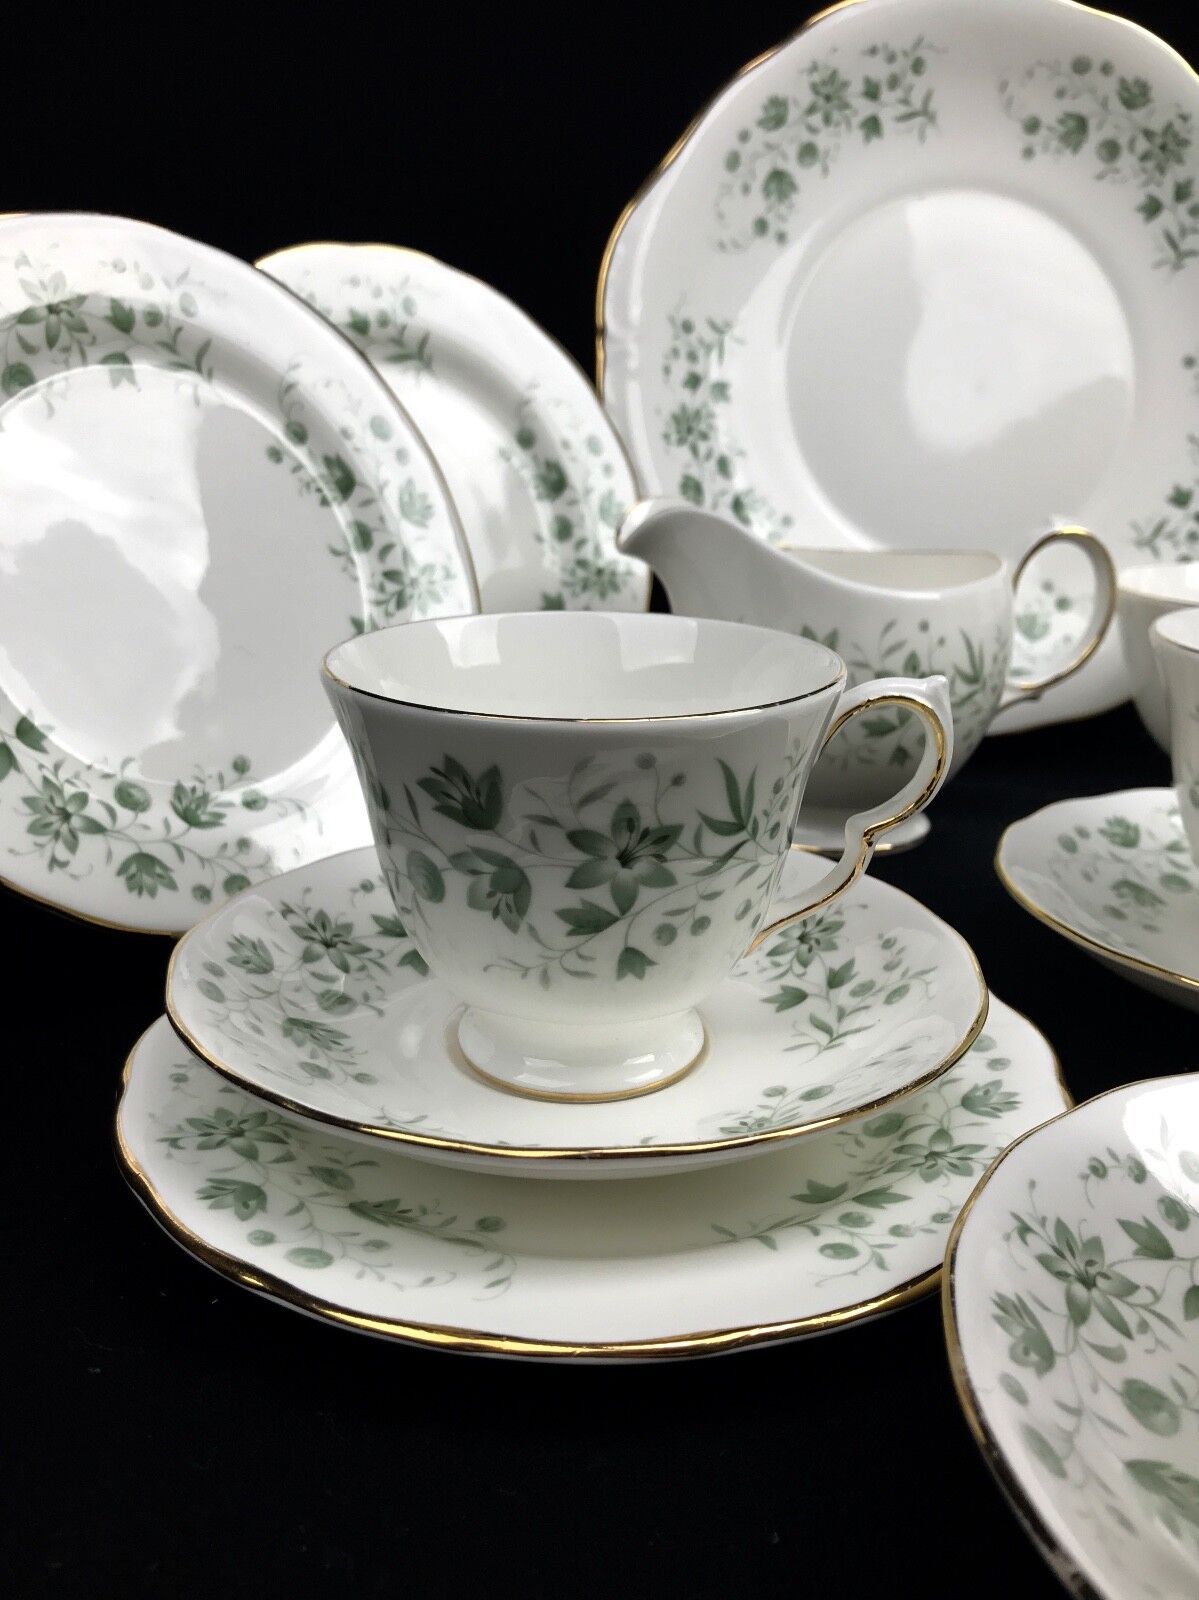 Queen Anne China Tea Set For 6 / 21 Piece / Pattern 8669 Green Floral / Trio